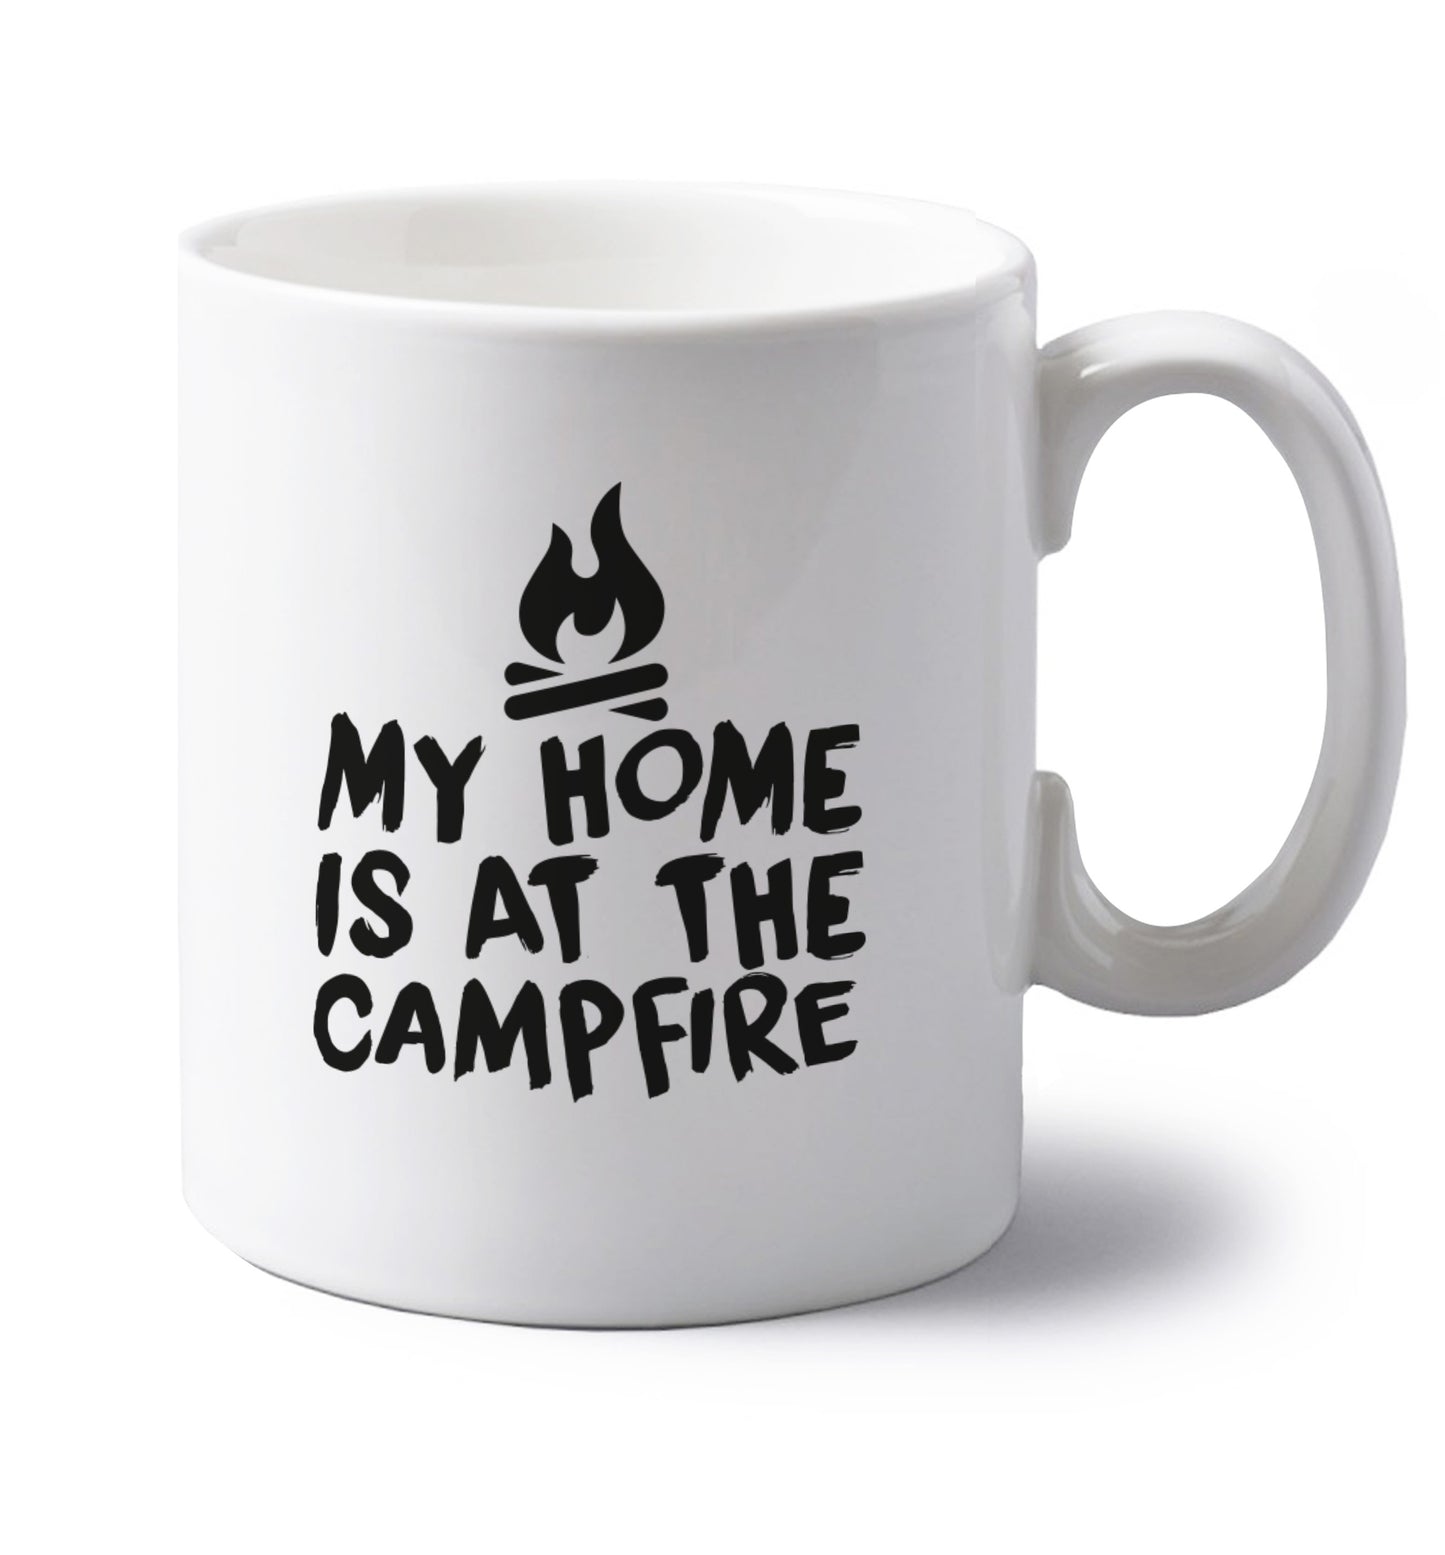 My home is at the campfire left handed white ceramic mug 